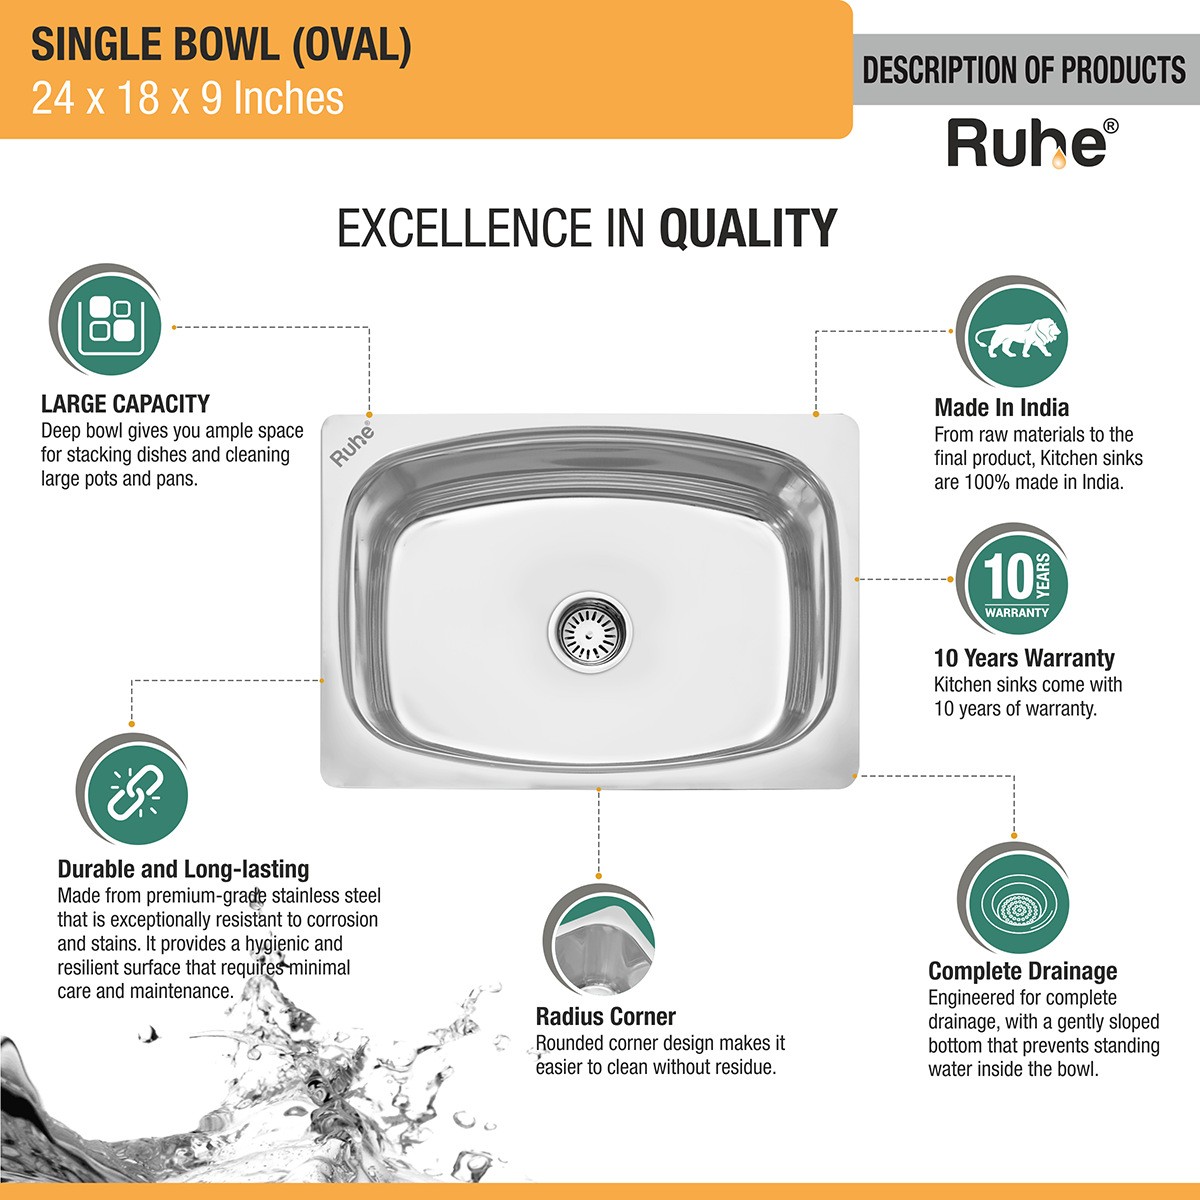 Oval Single Bowl (24 x 18 x 9 inches) Kitchen Sink description of products